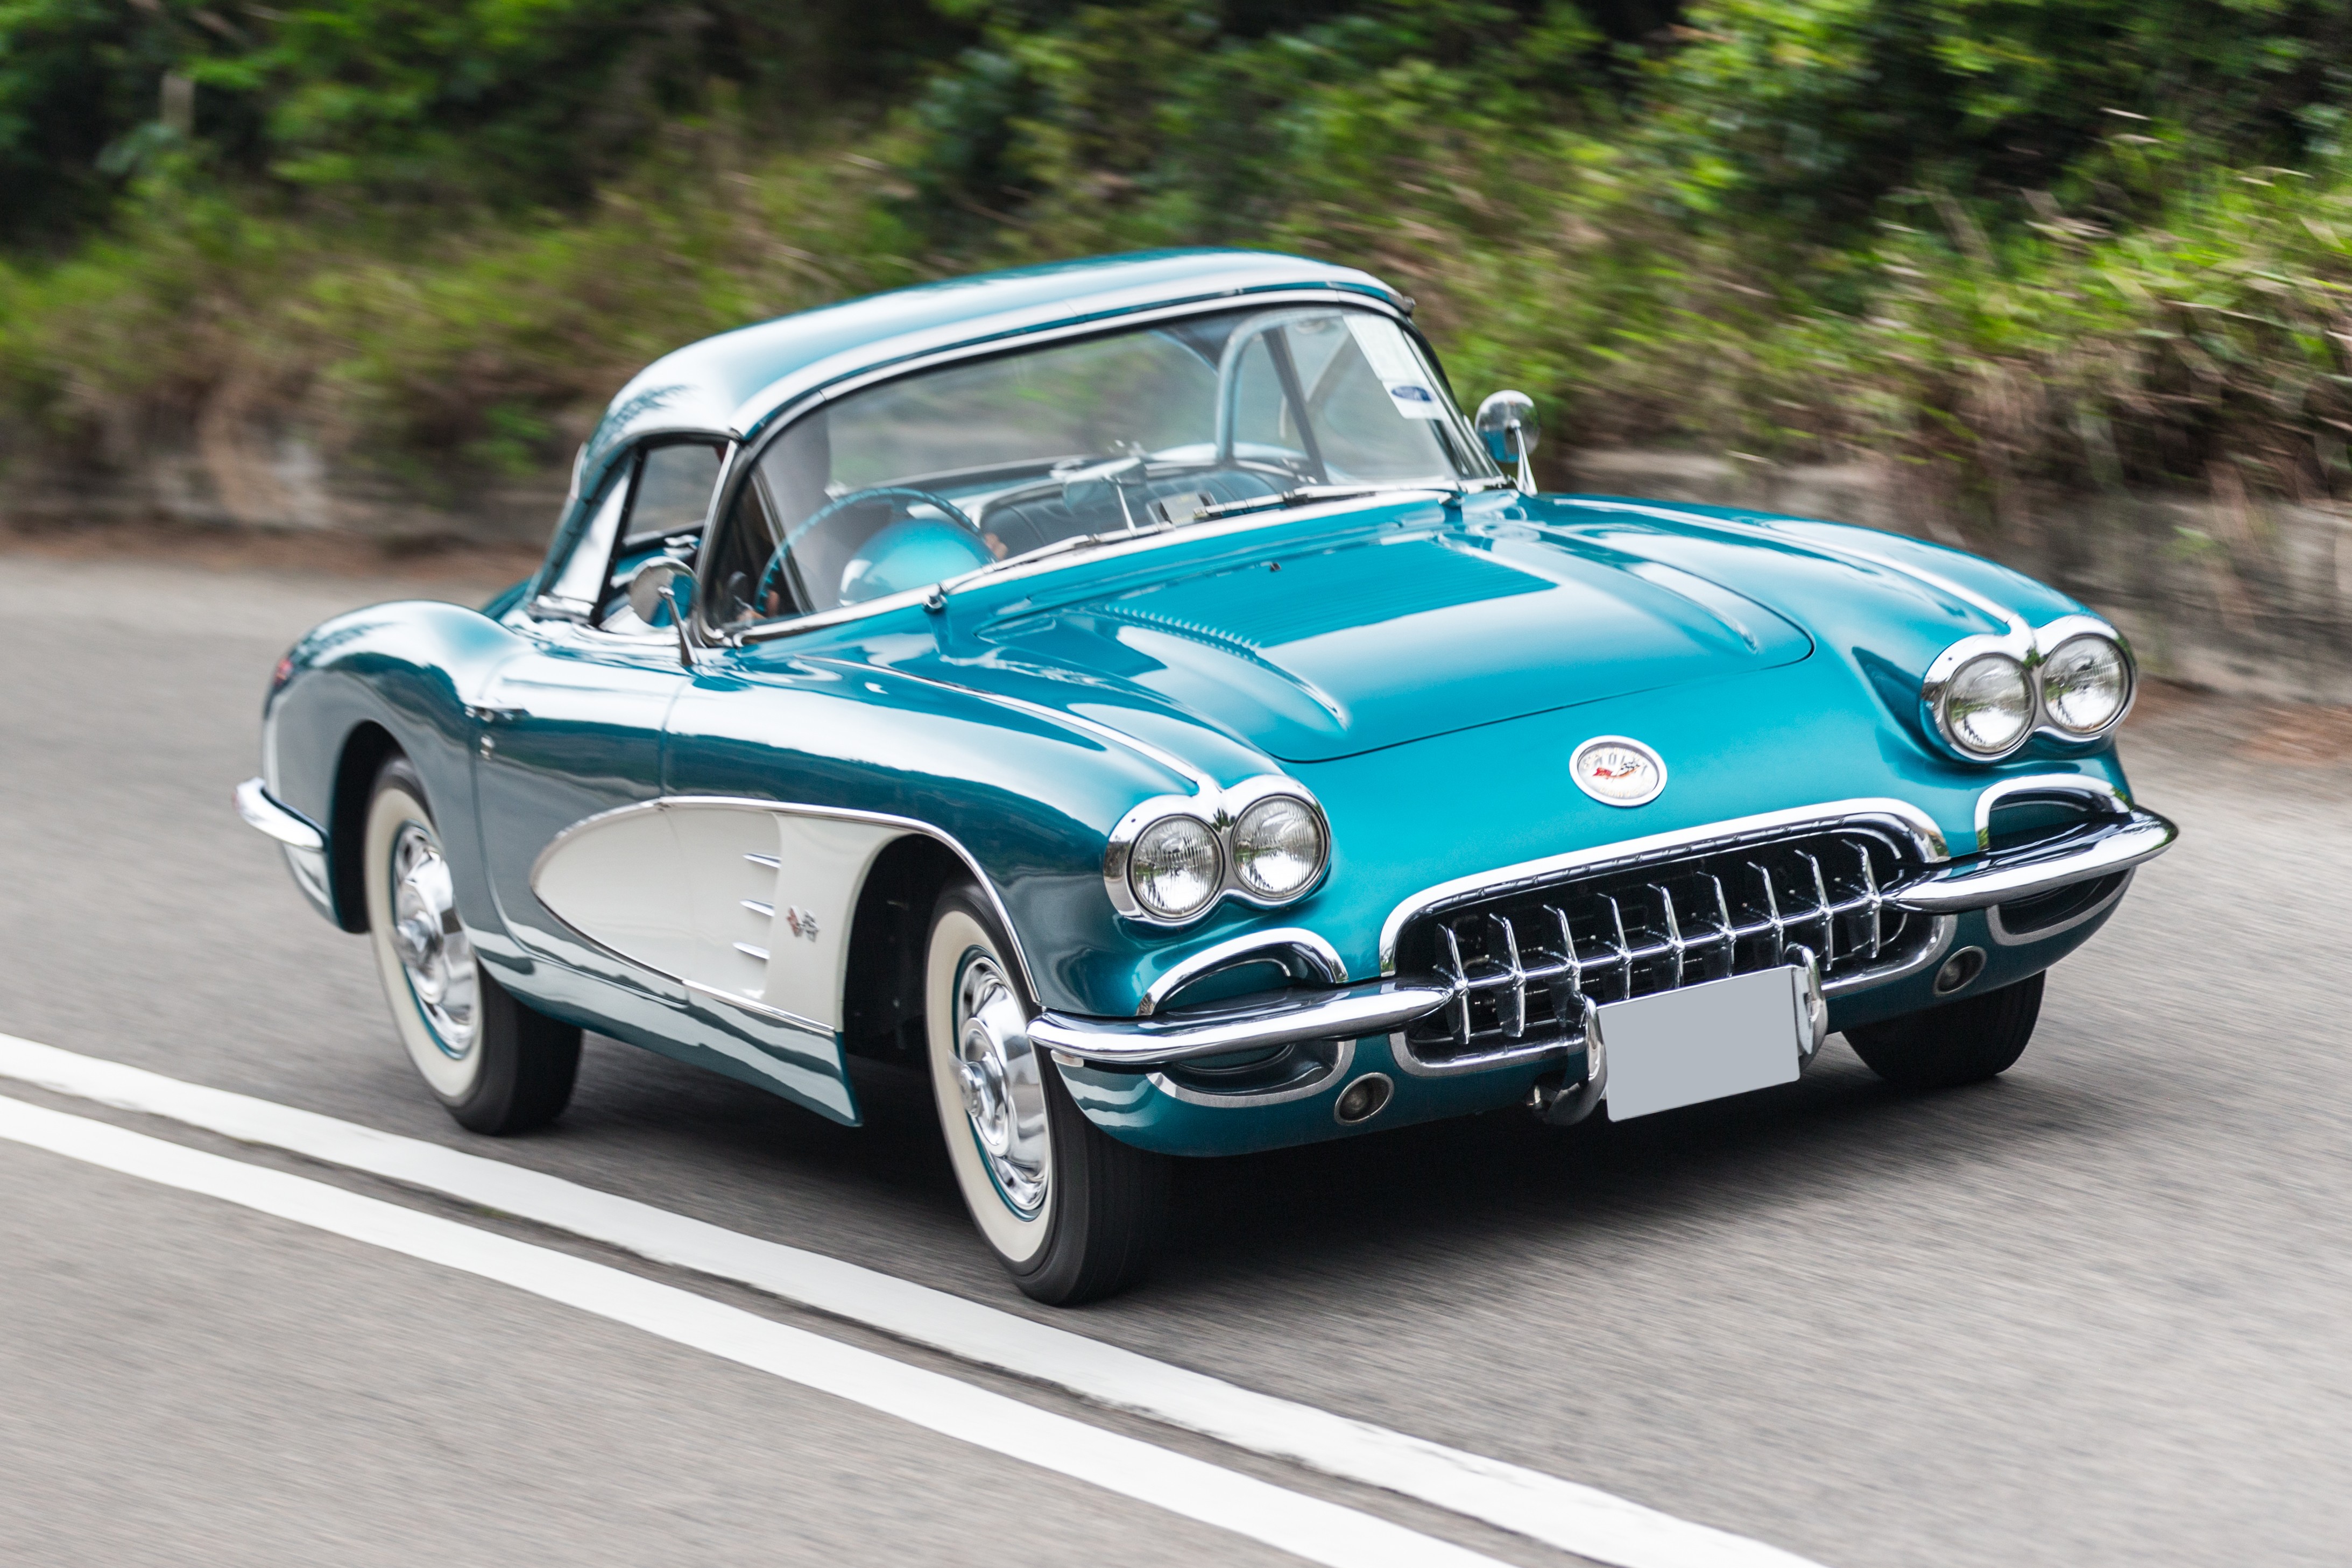 The Chevrolet Corvette has developed into ‘America’s sports car’ since first appearing in 1953. Photos: Cygnus Photography